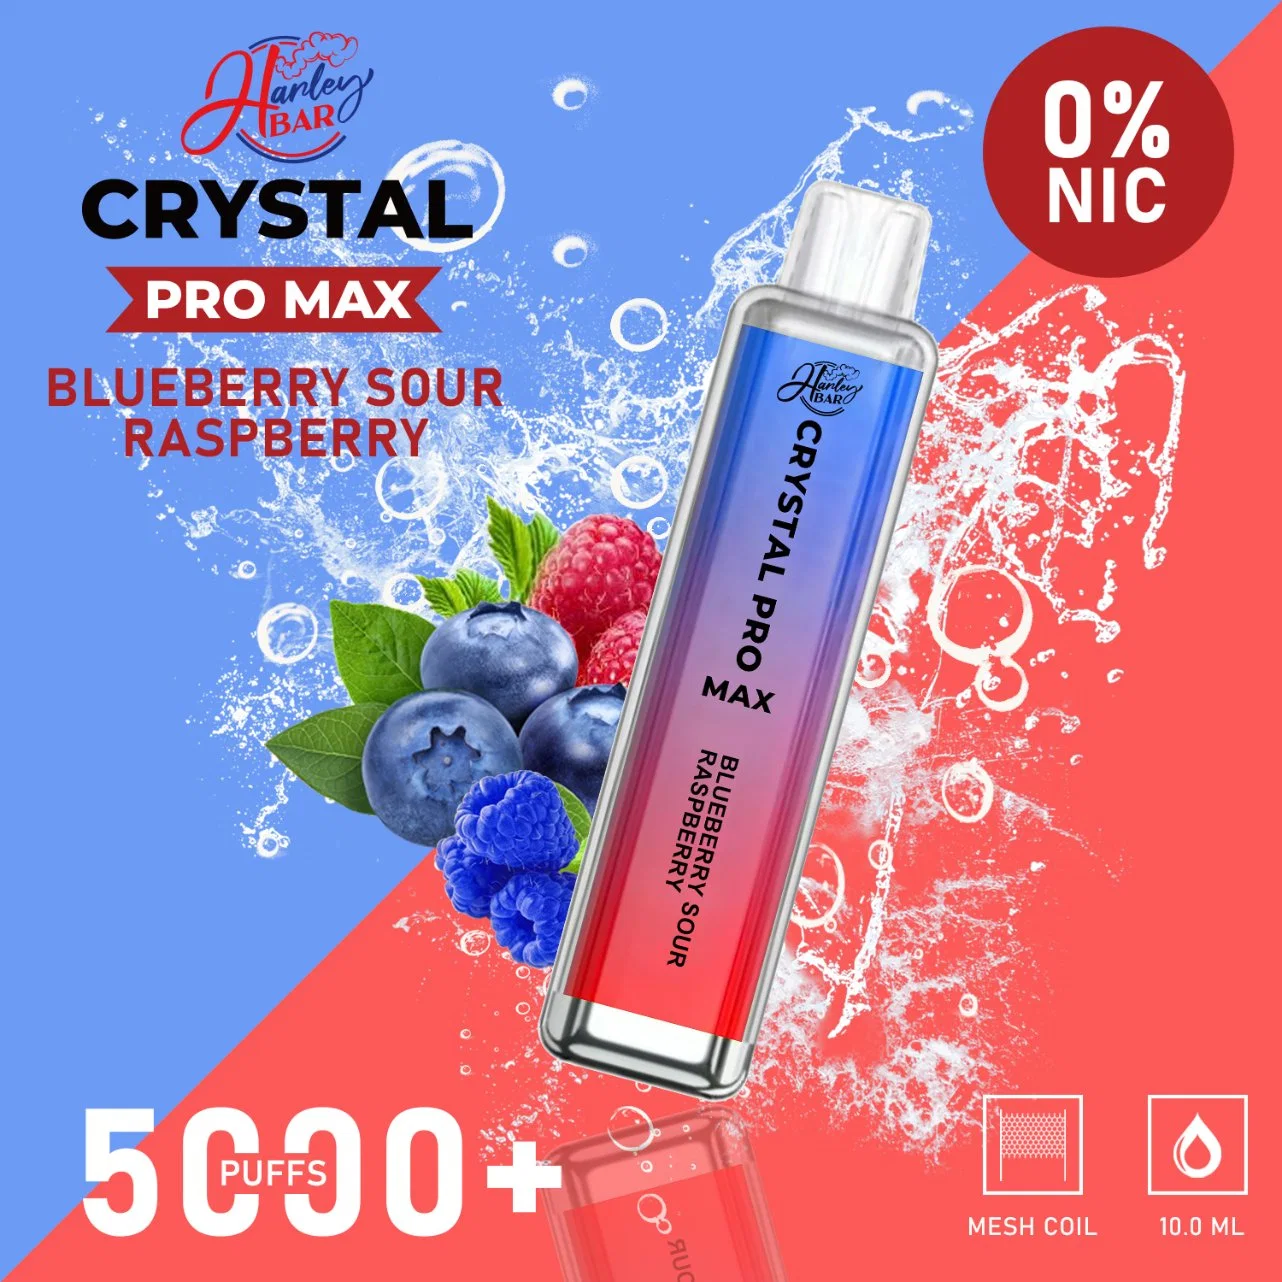 2023 UK Best Selling Wholesale/Supplier I Vape Pen Crystal PRO Max 5000+ Disposable/Chargeable Electronic Cigarette 20 Flavors 12ml with Tpd